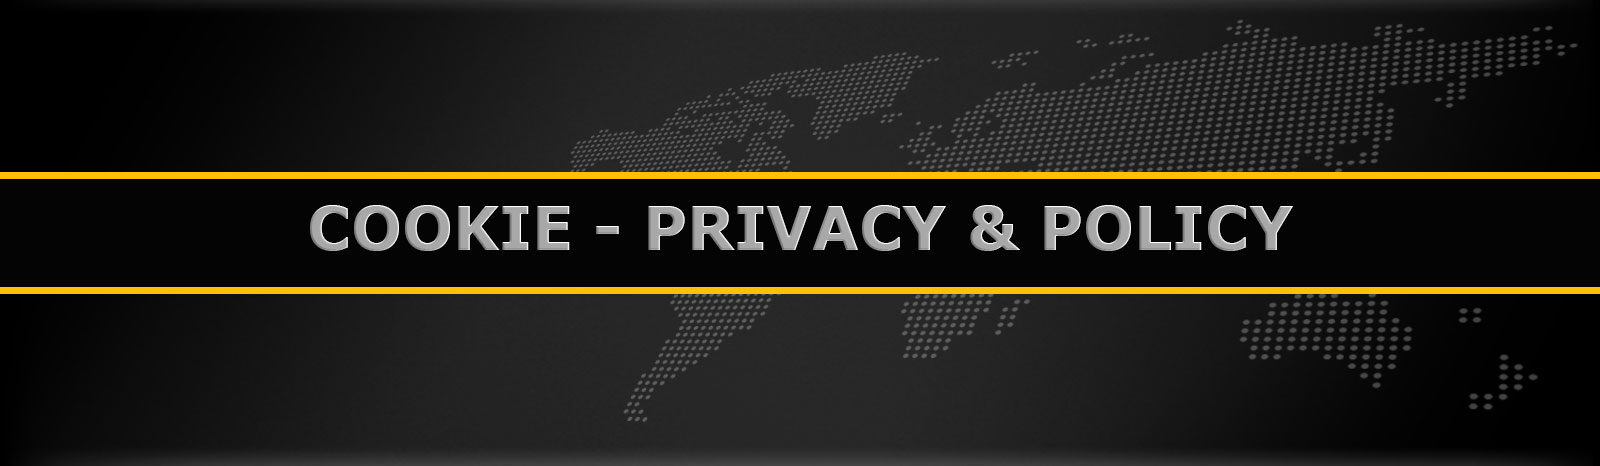 Informatica Cookie - Privacy & Policy